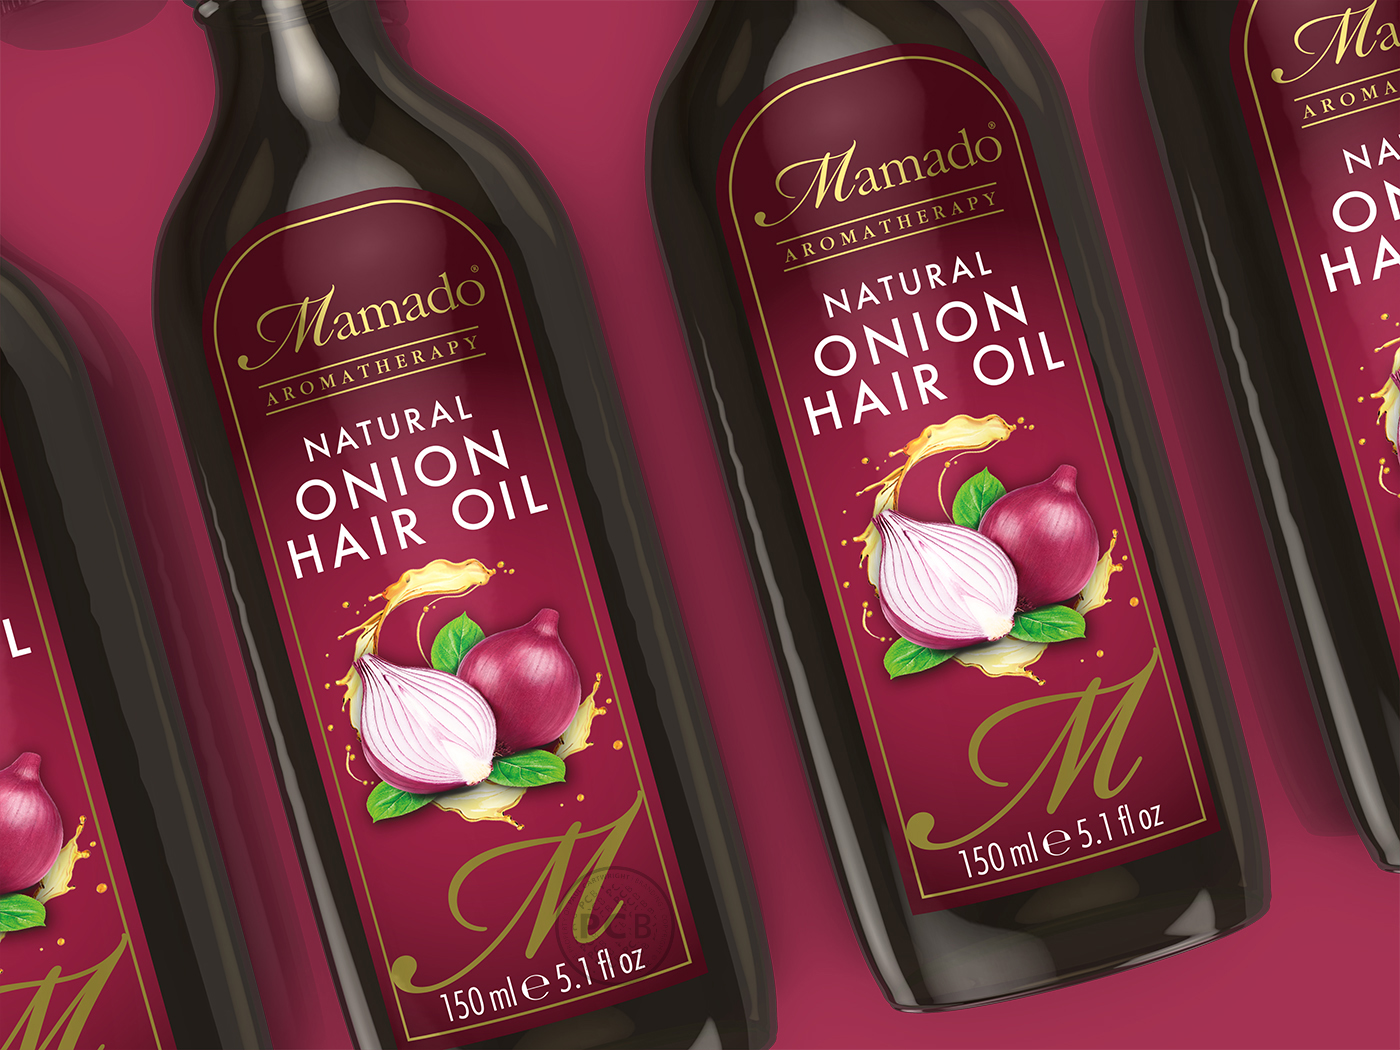 Close-up of 3D visual of Red Onion Hair Oil essential oils product for Mamado Aromatherapy.